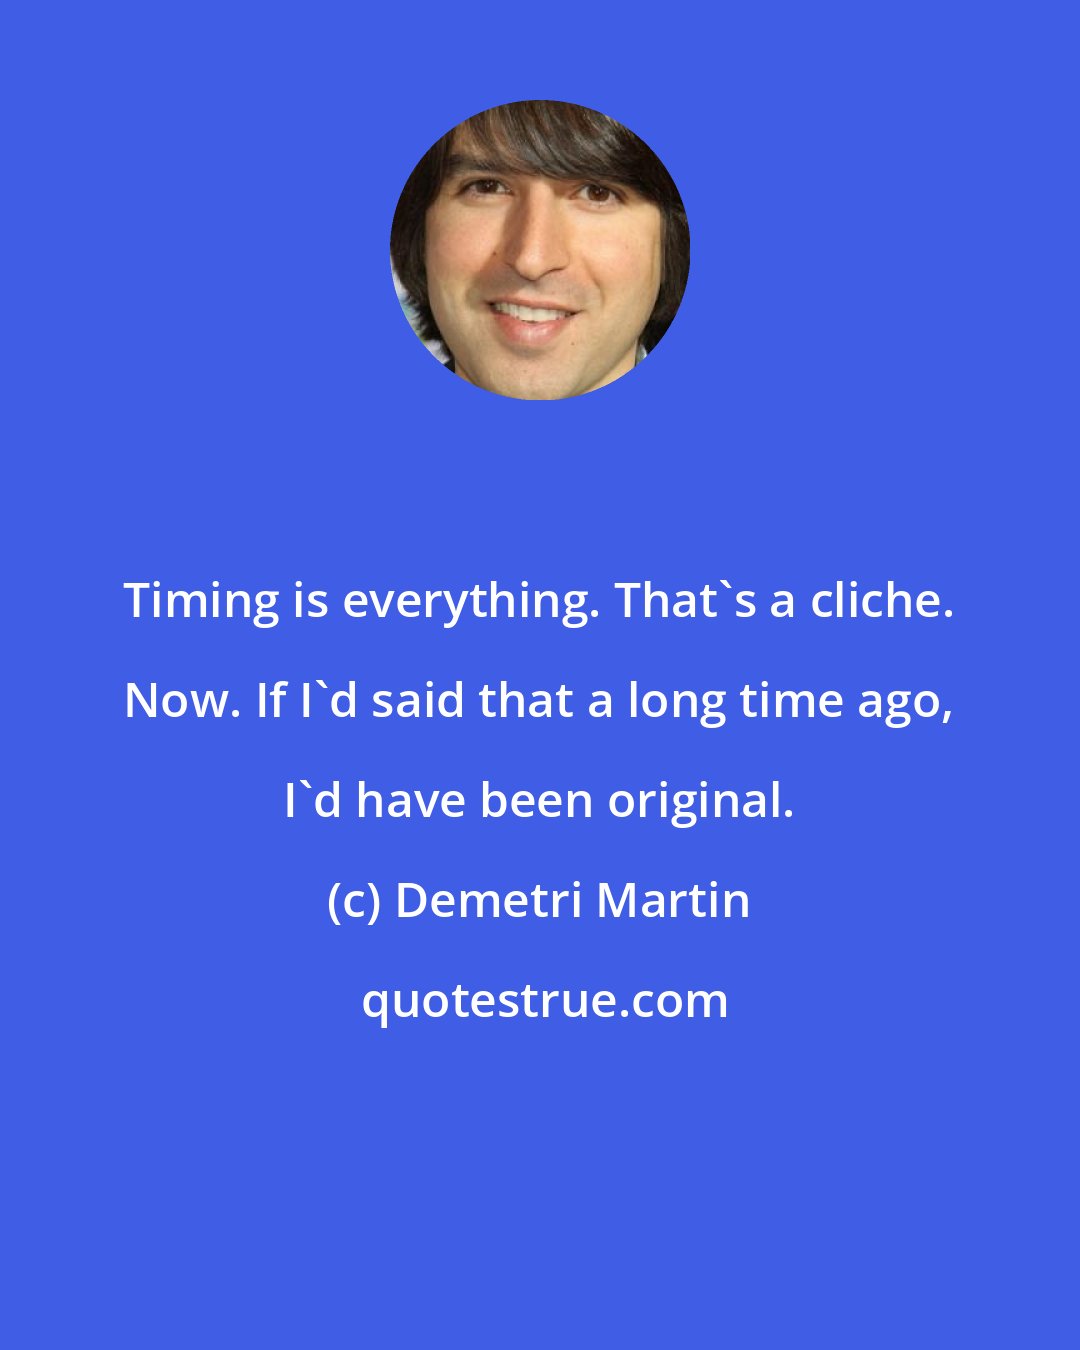 Demetri Martin: Timing is everything. That's a cliche. Now. If I'd said that a long time ago, I'd have been original.